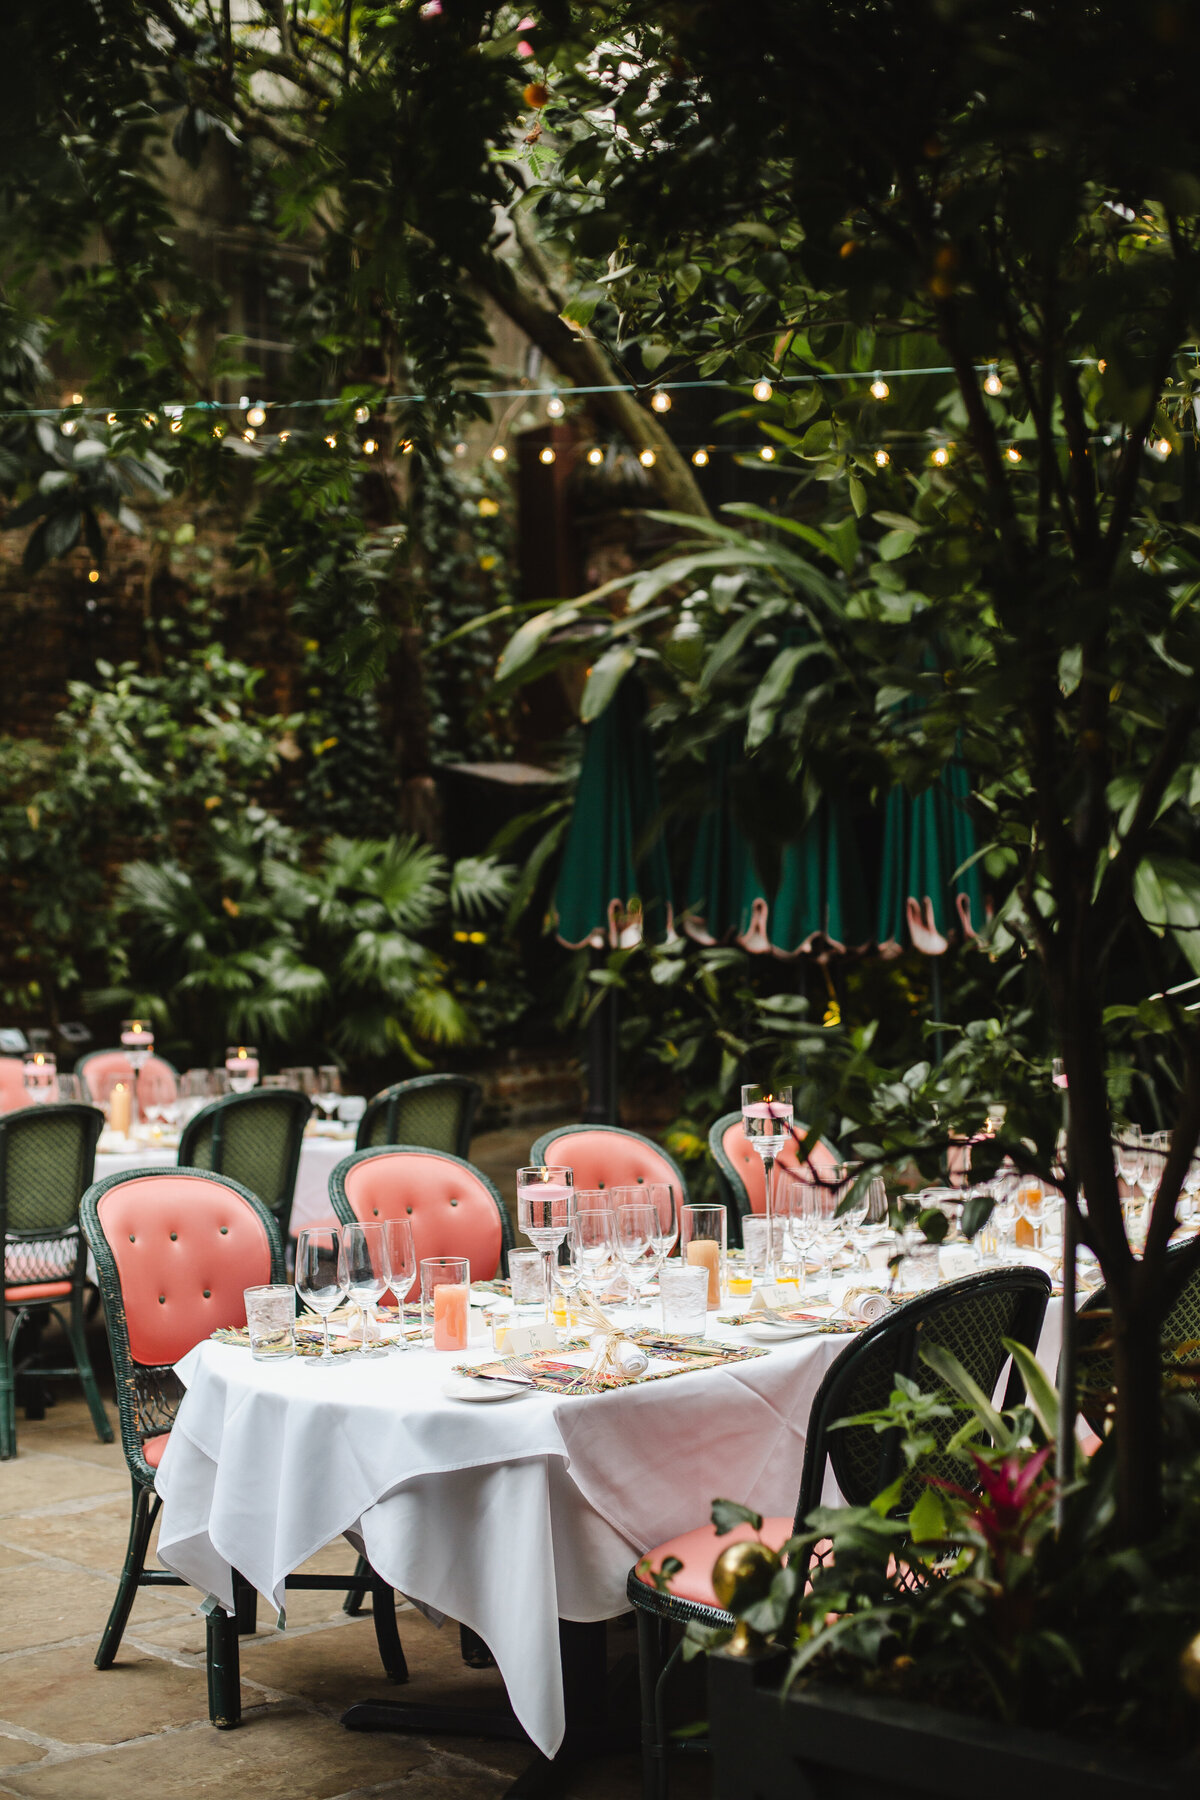 Sarah + George - Rehearsal Dinner Welcome Party at Brennen's New Orleans - Luxury Event Planner - Michelle Norwood Events17